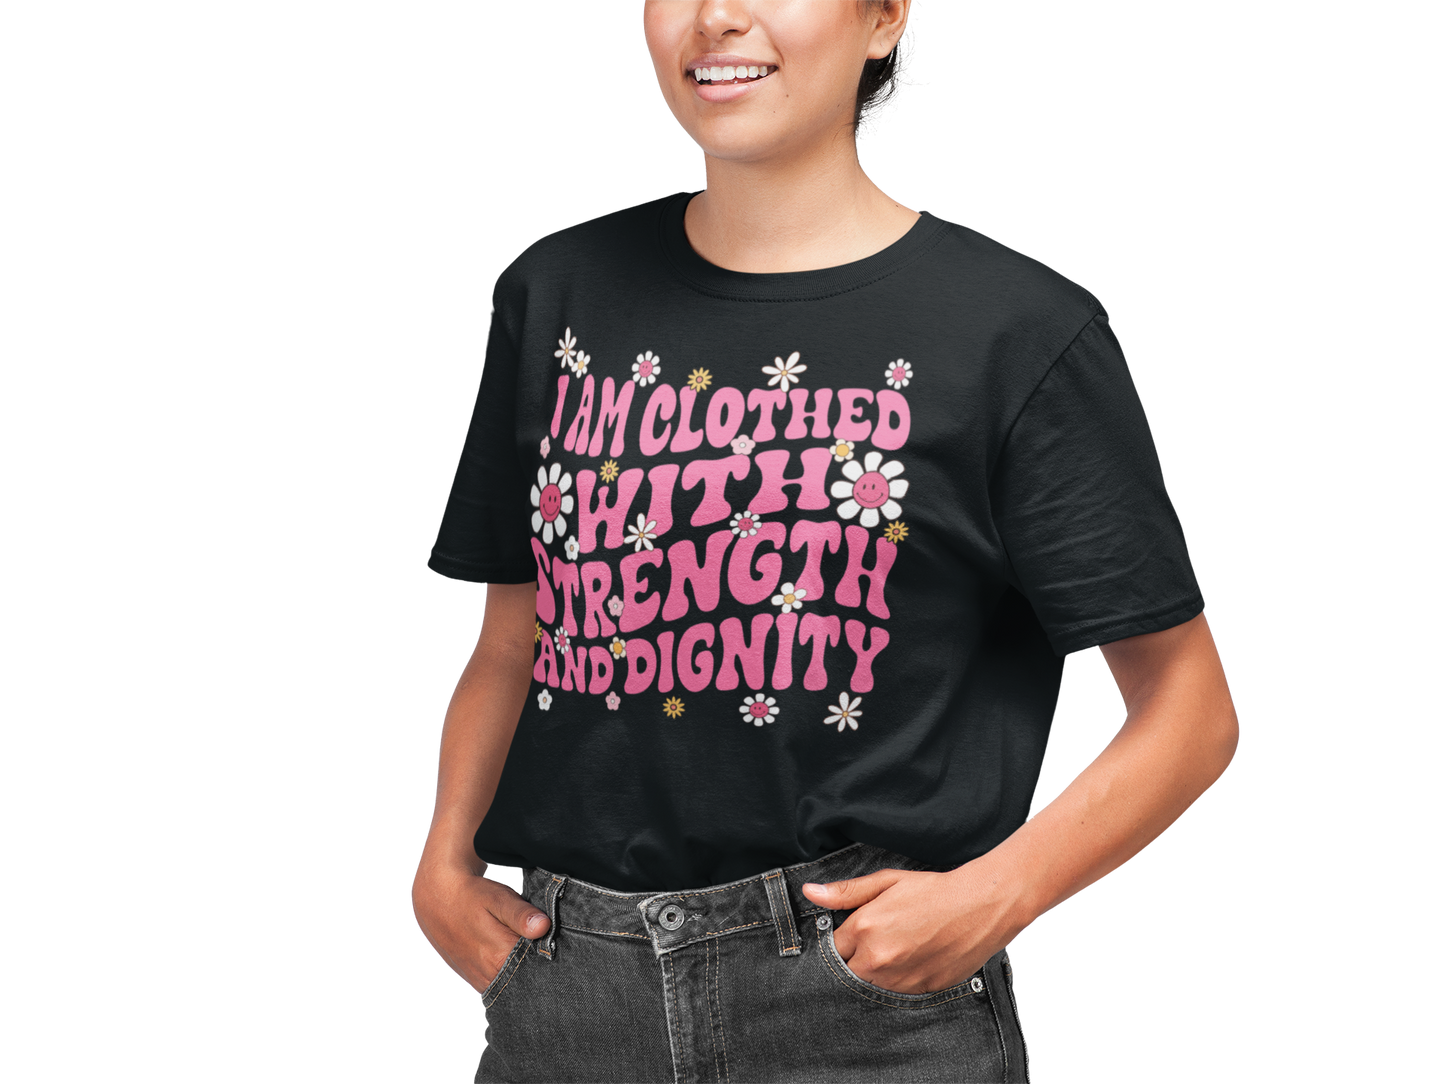 Clothed with Strength Tee